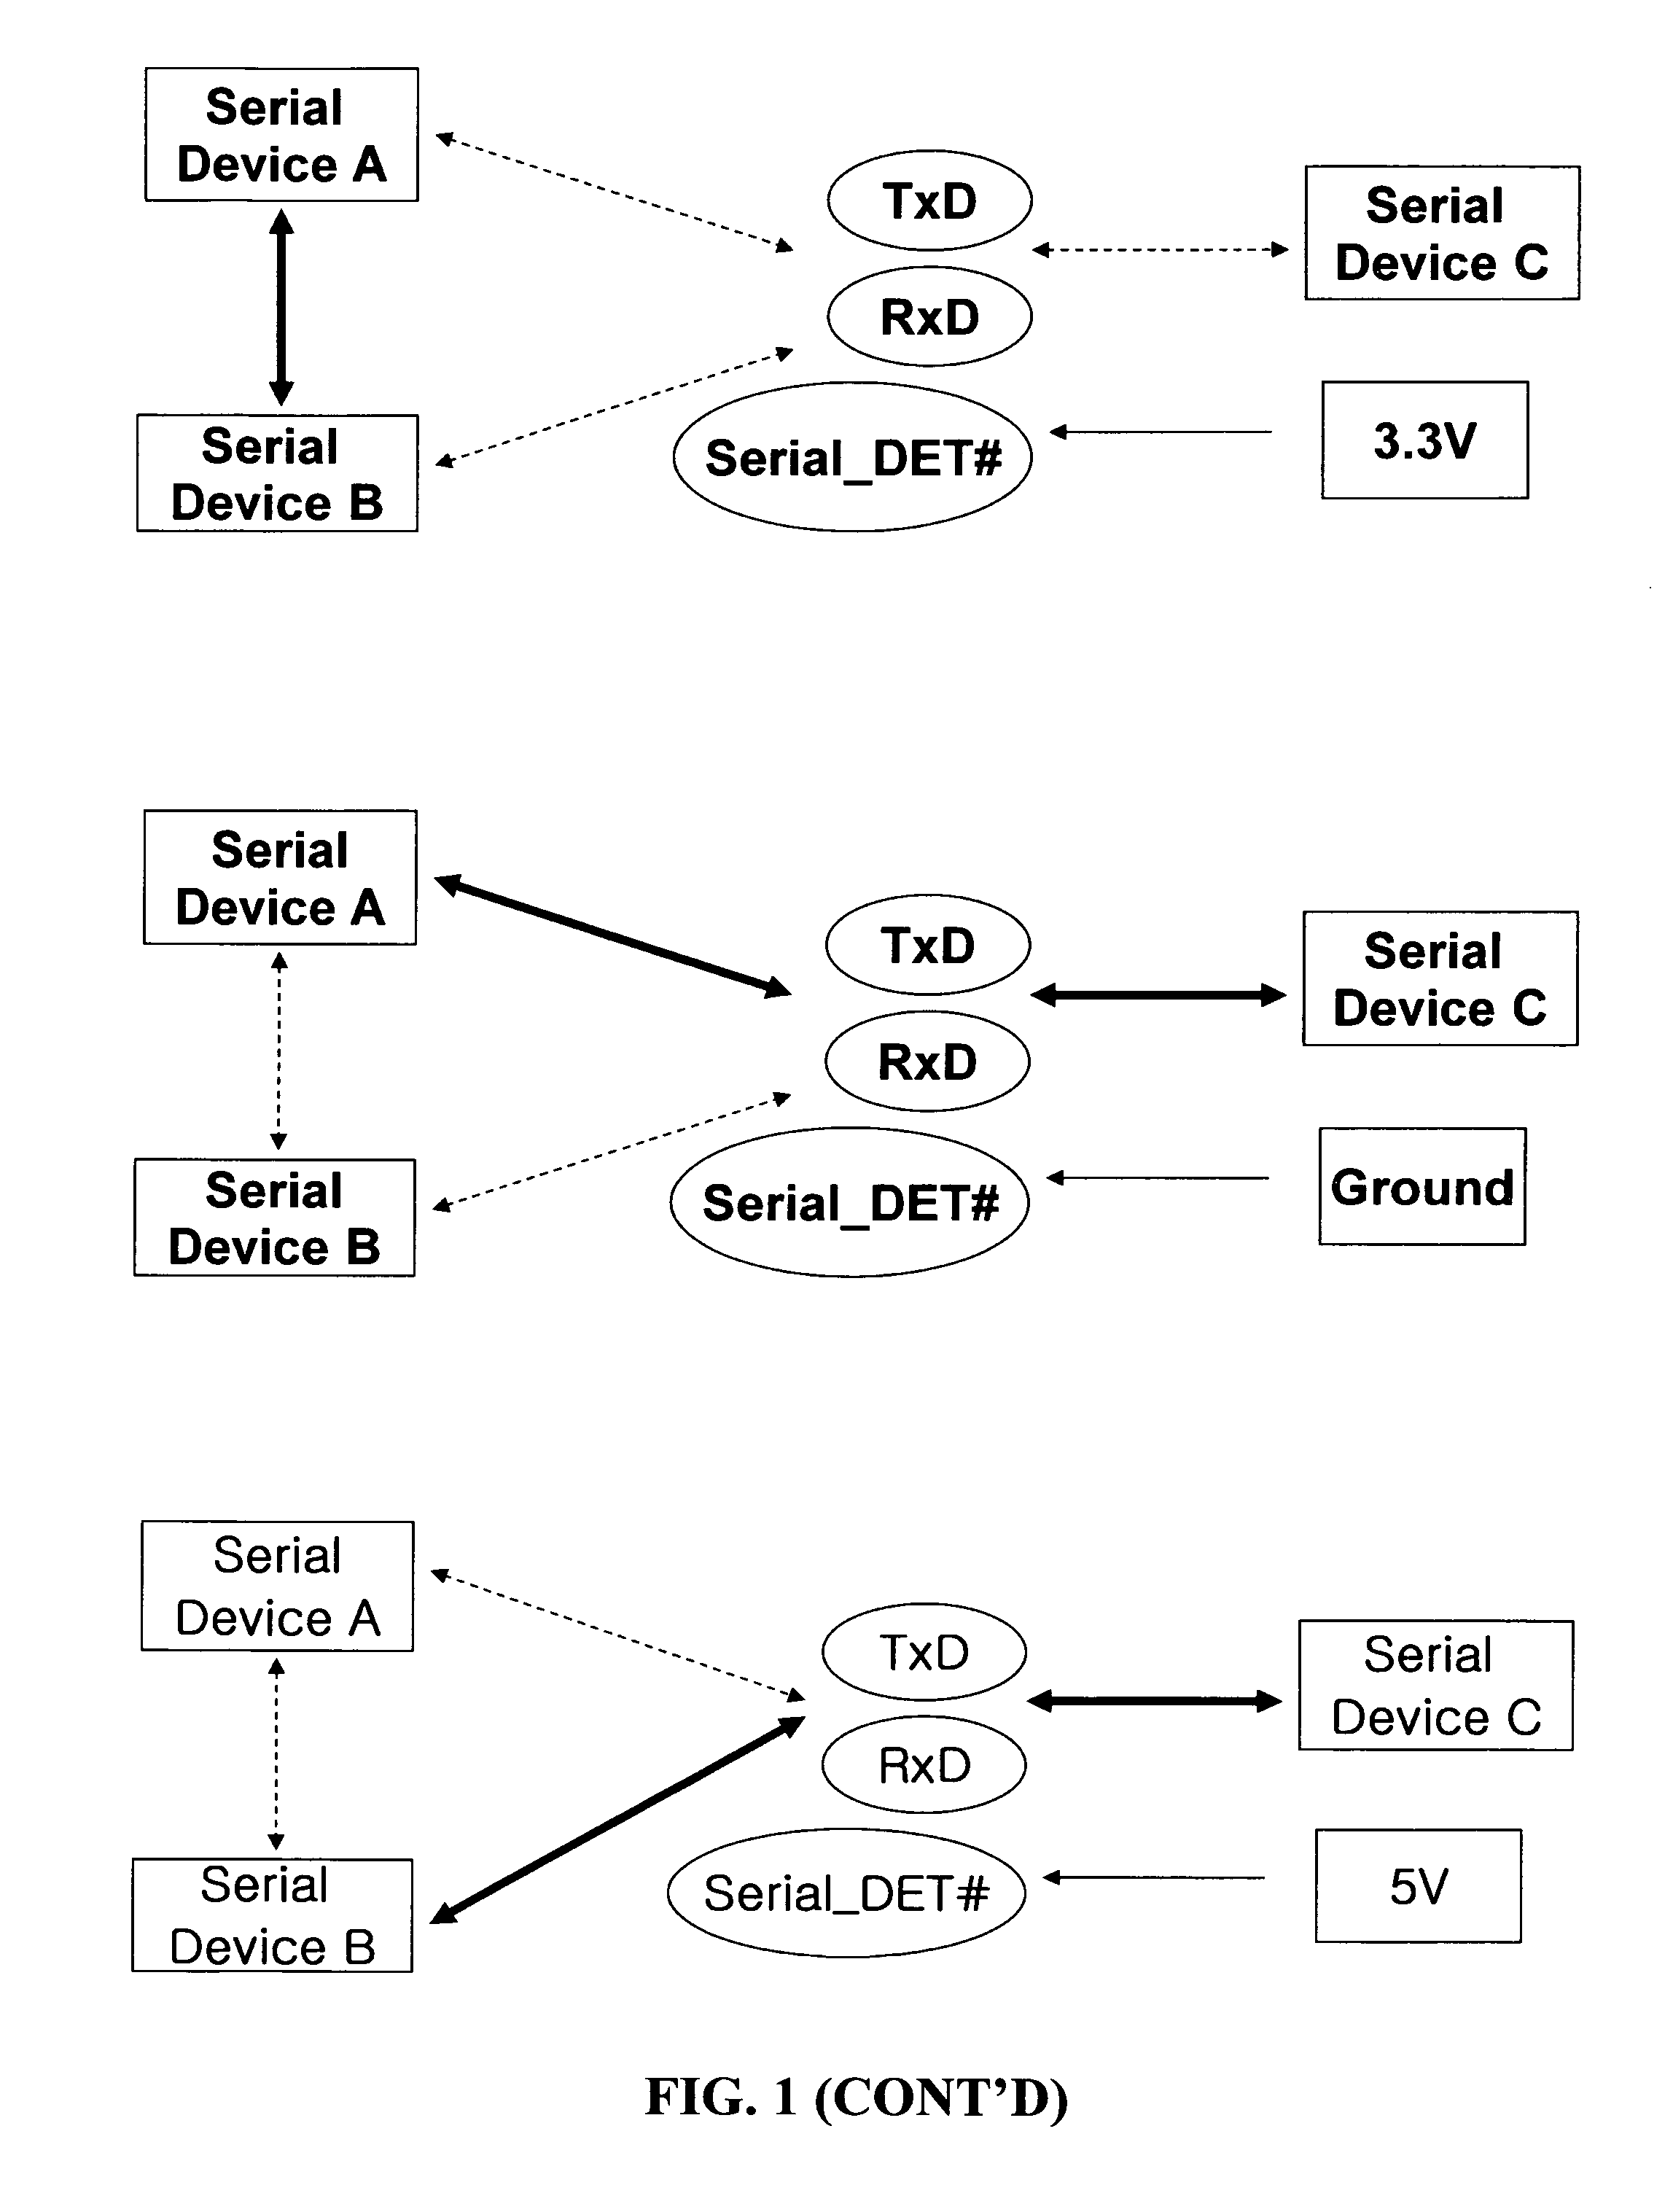 Method and apparatus for improved interfacing of connections between a multiplicity of handheld devices